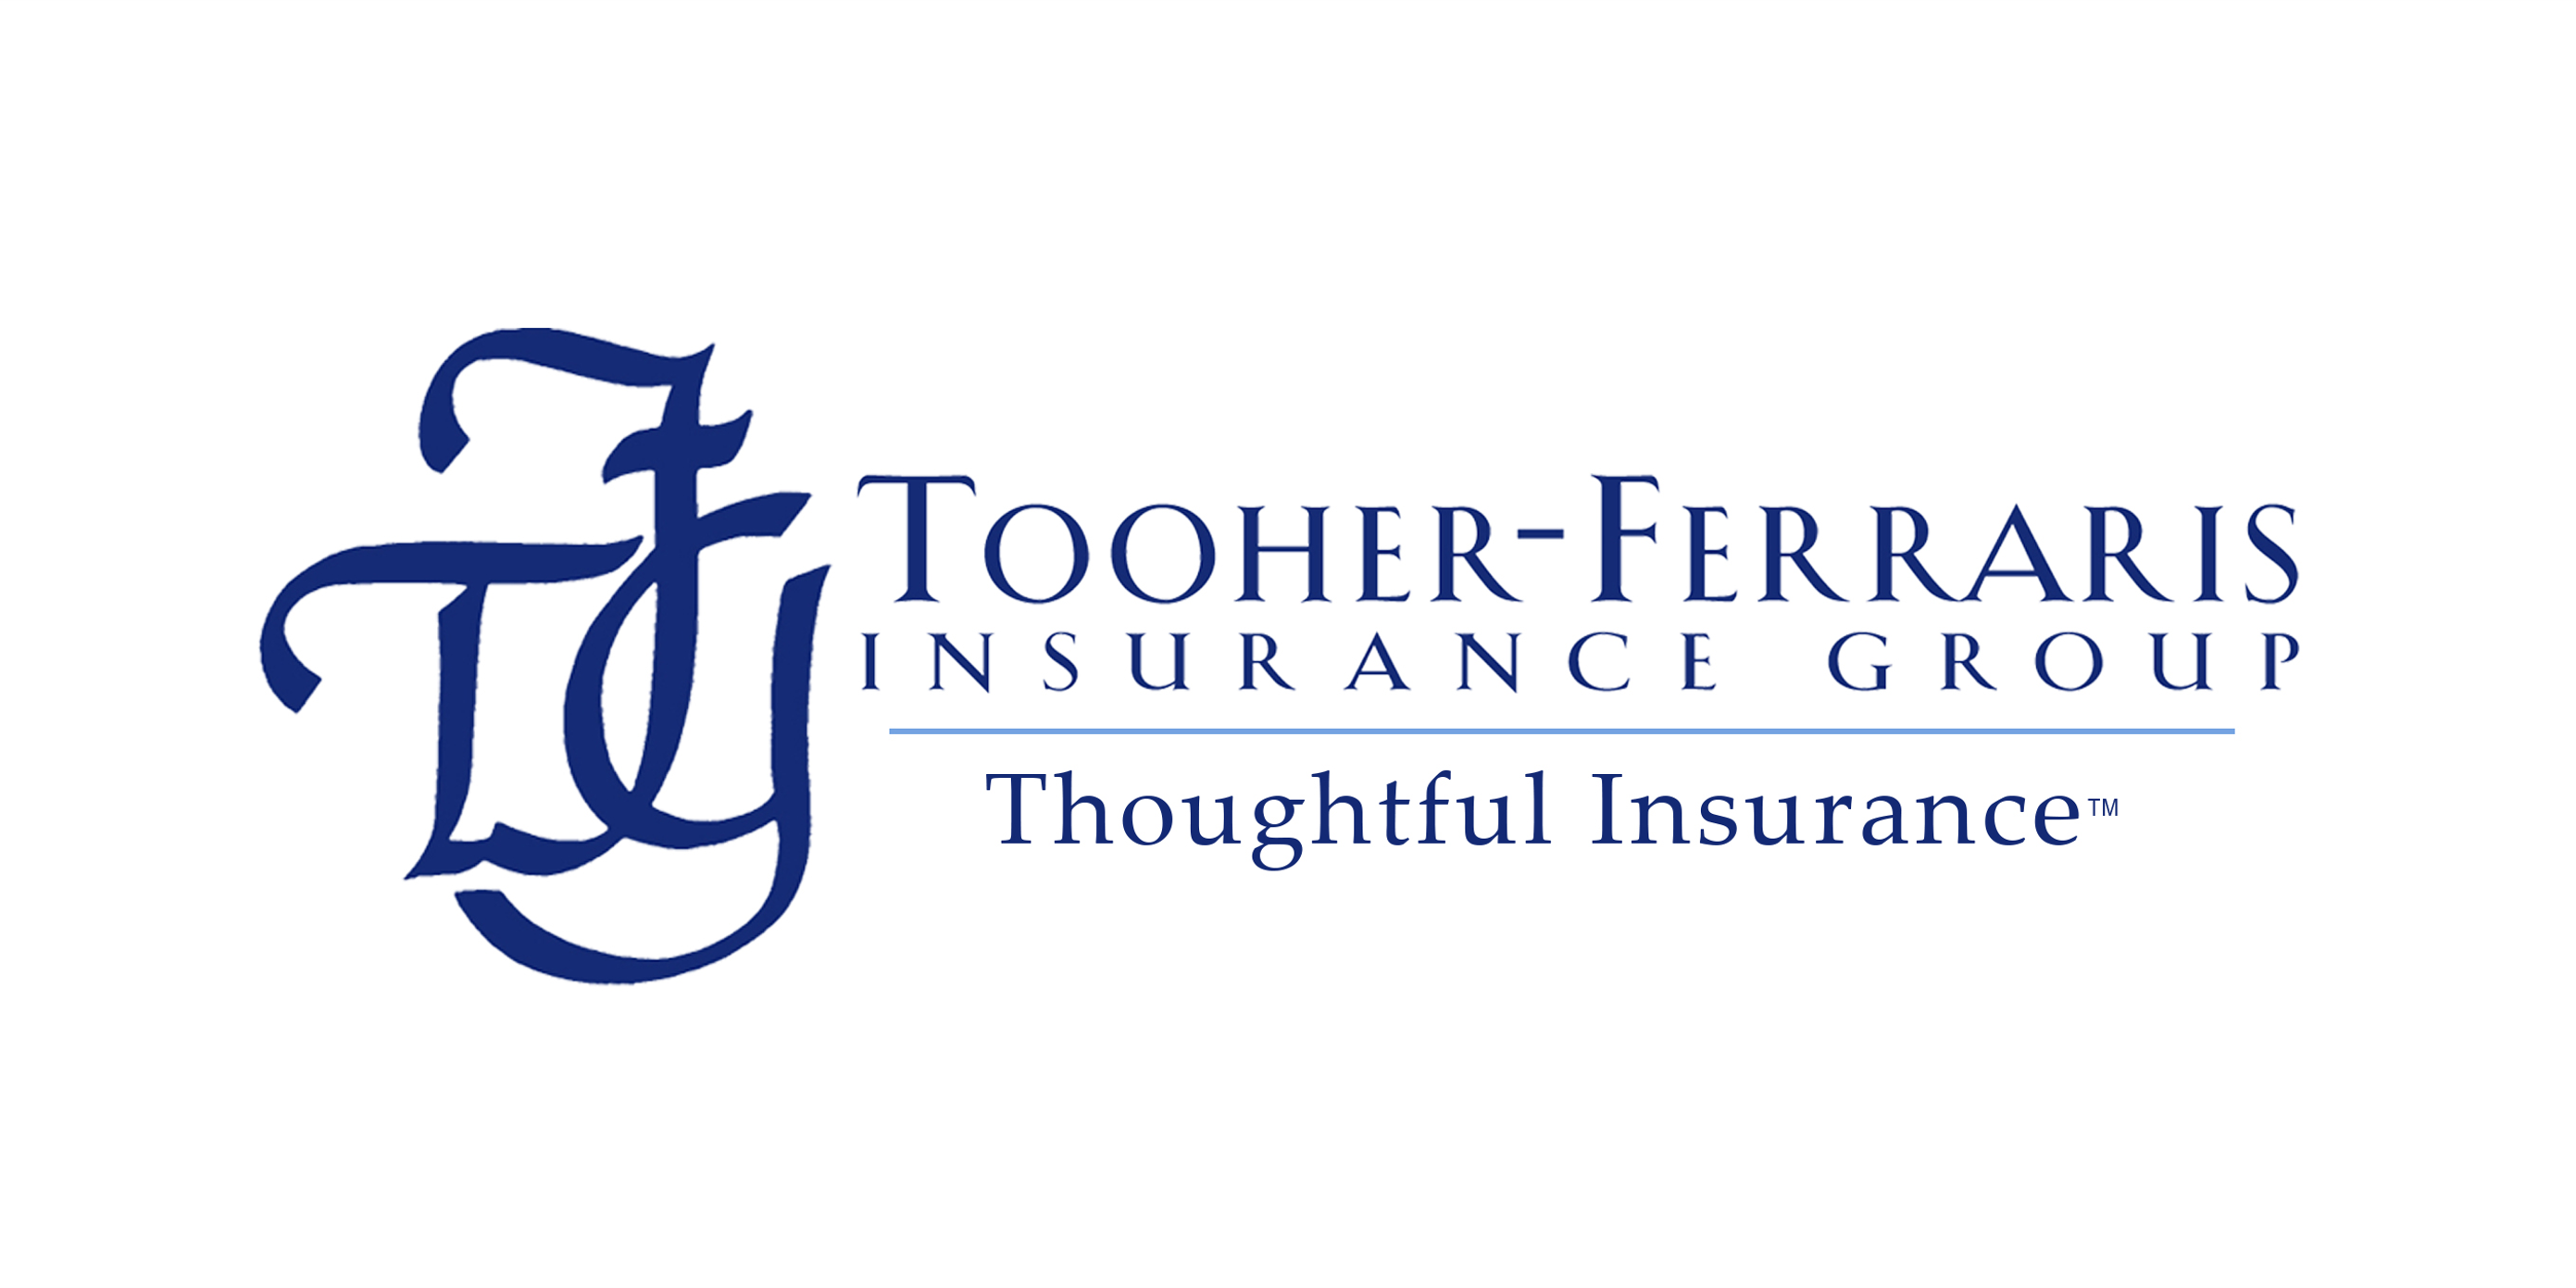 Tooher-Ferraris Insurance Group, a Proud Member of the Greater Norwalk Chamber